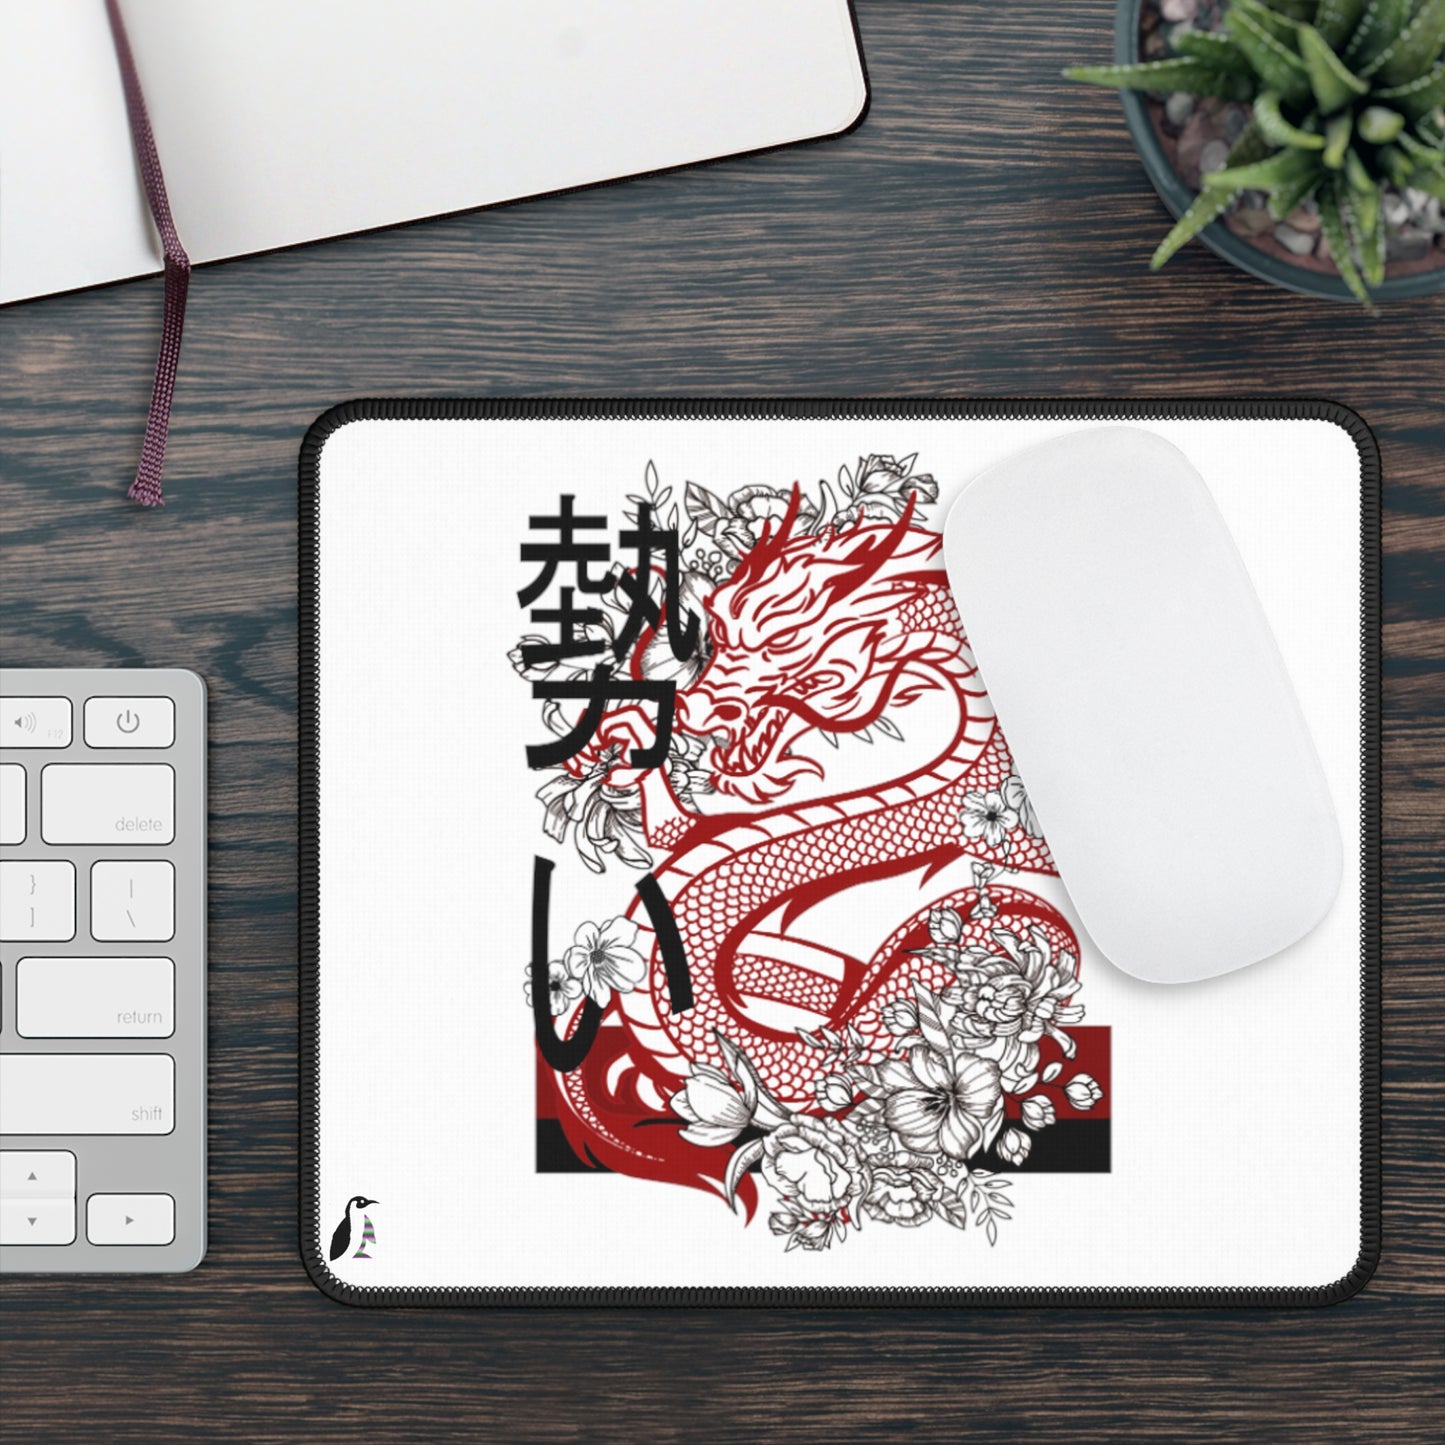 Gaming Mouse Pad: Dragons White